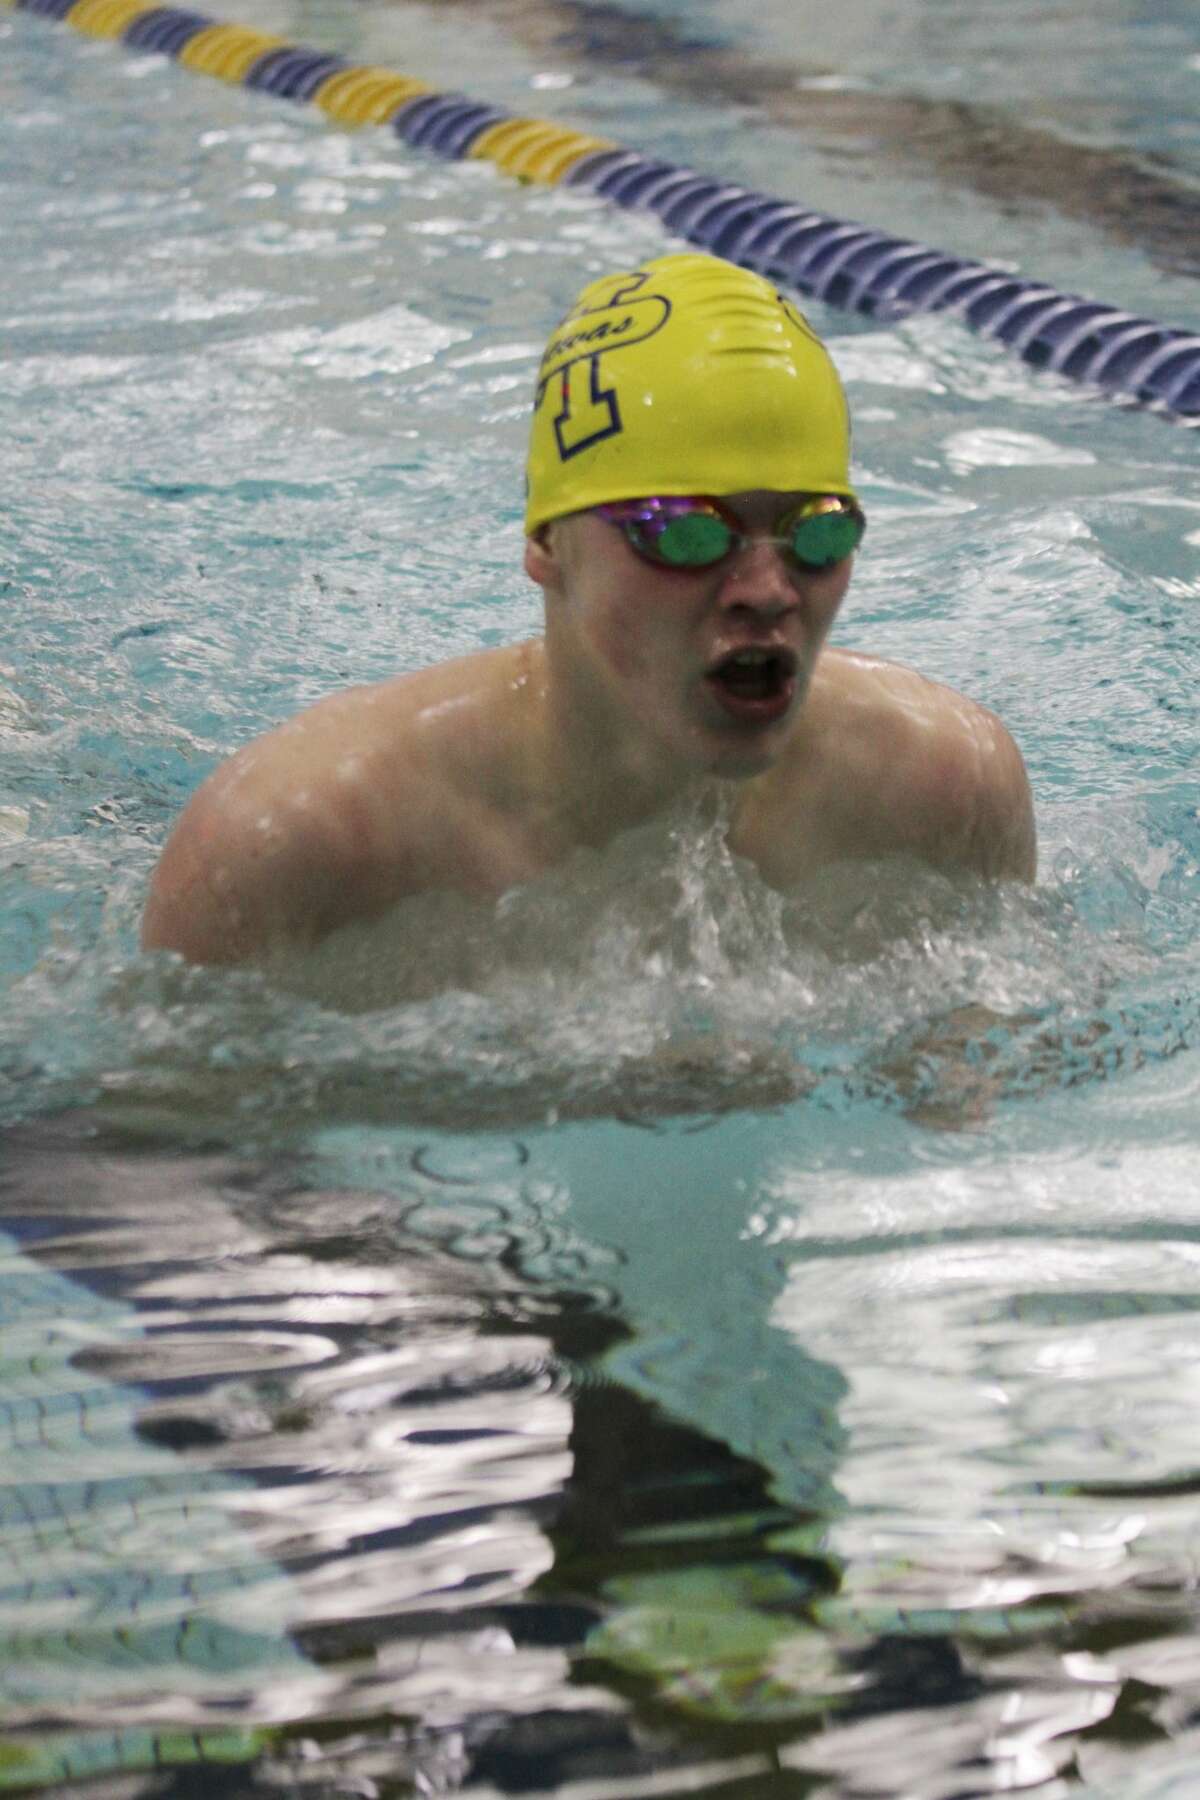 The Manistee boys swim team cruised to a convincing victory over Fremont on Thursday night at the Paine Aquatic Center in the team's long awaited season opener.